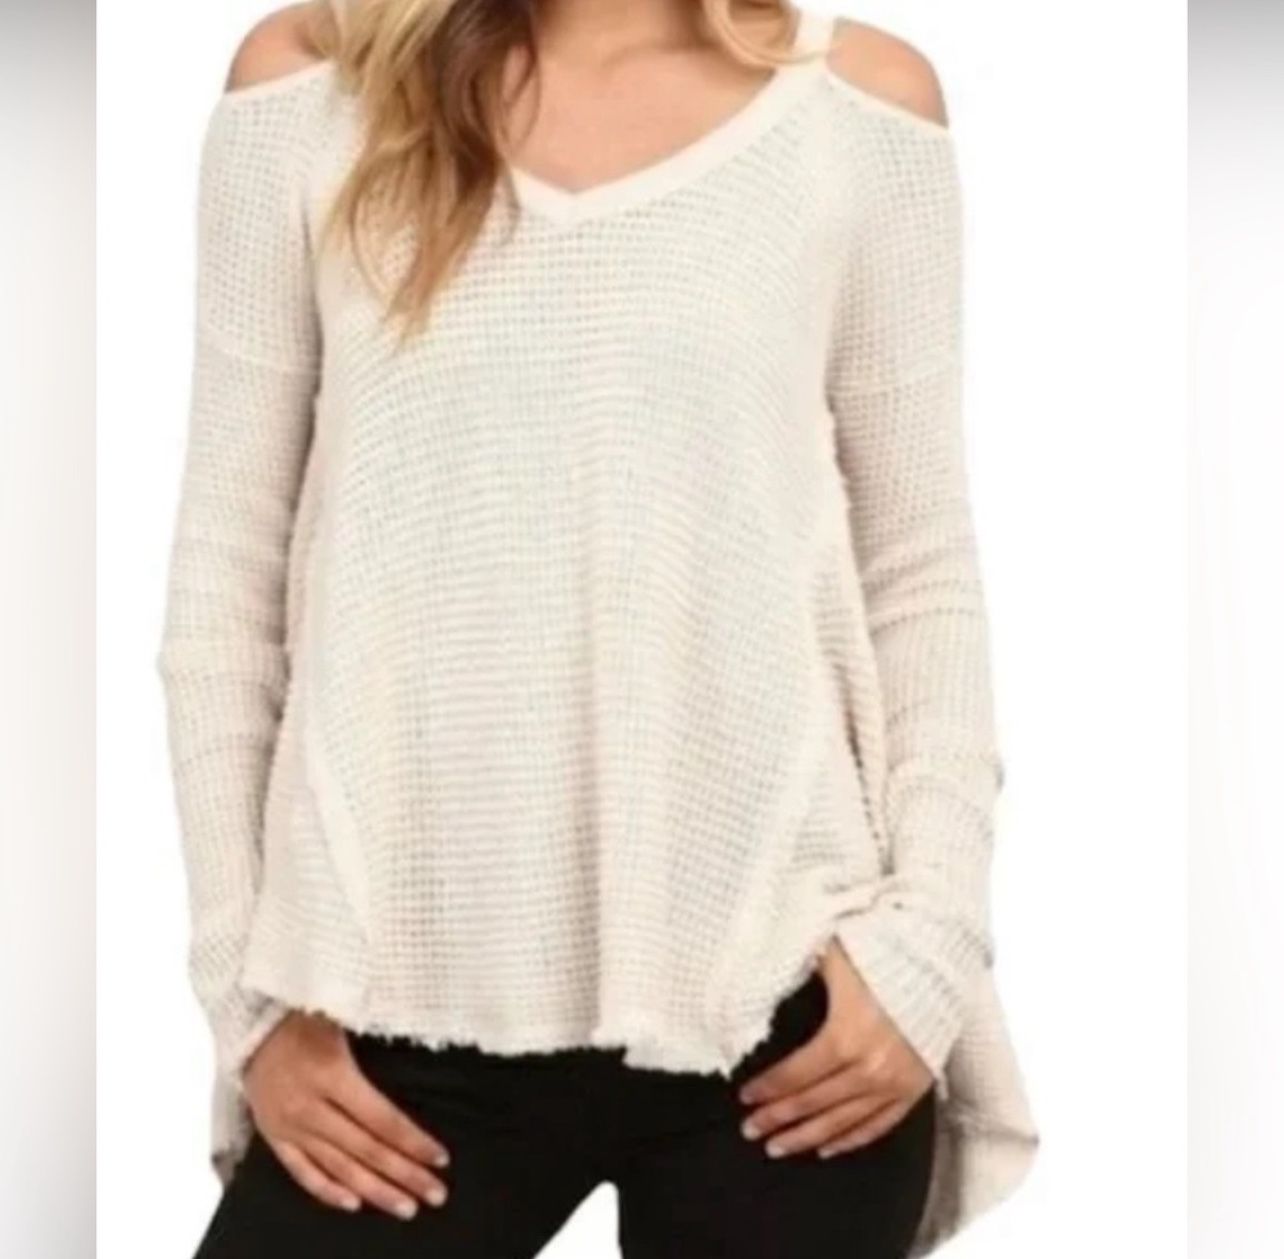 Elan  Tunic Distressed Off Shoulder Knit Crochet Sweater For Sale !!!